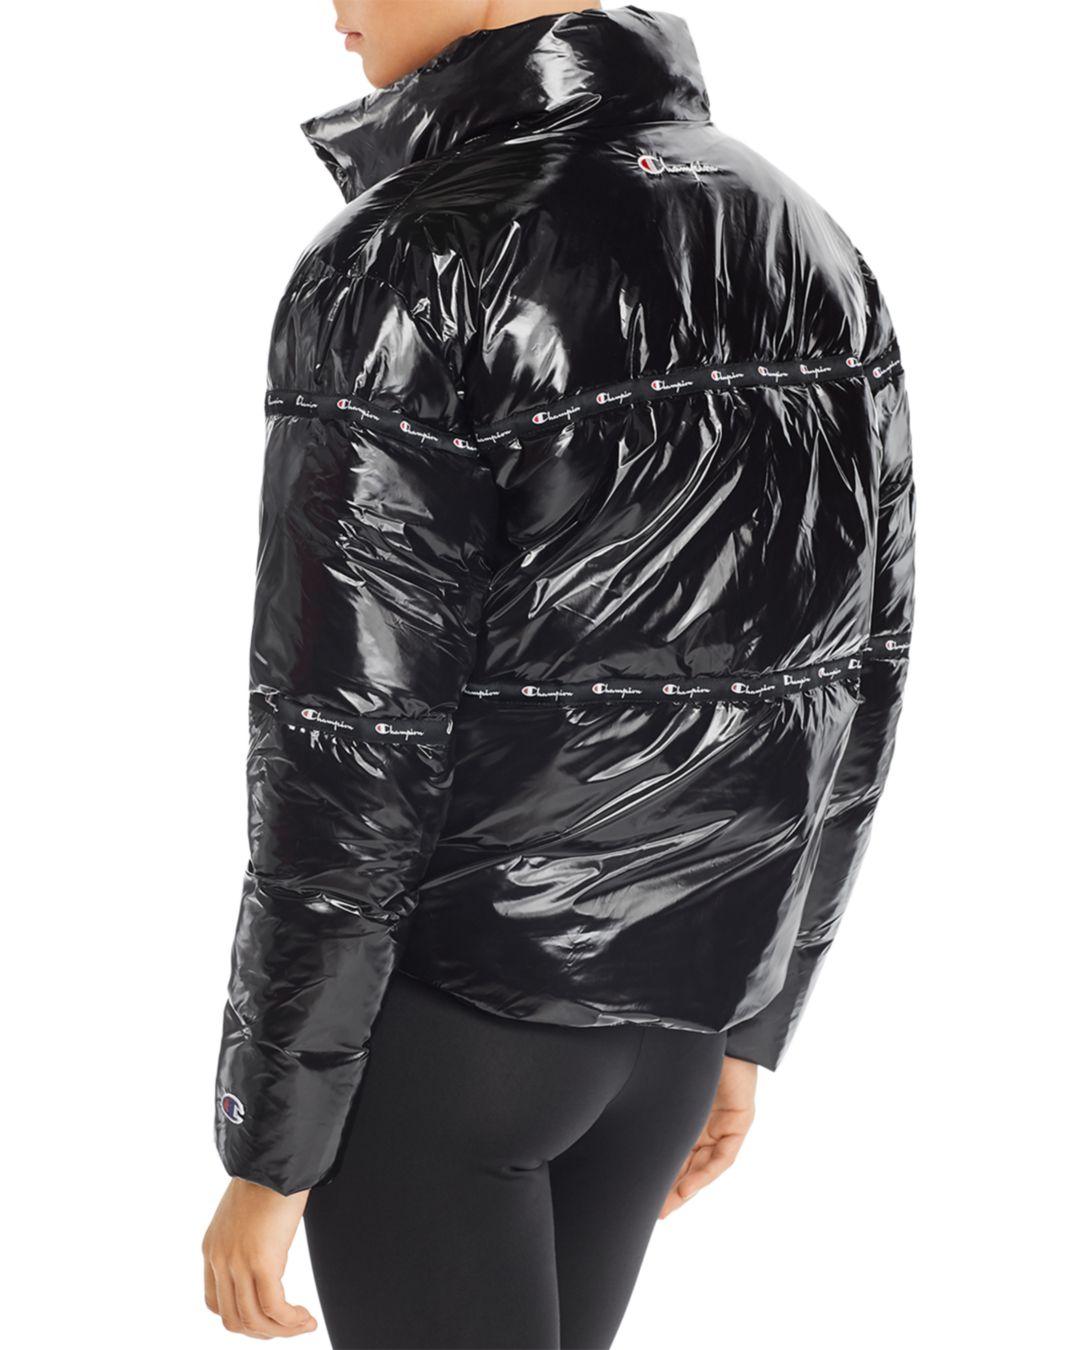 Shiny Champion Puffer Jacket Discount, GET 60% OFF, obl.ie